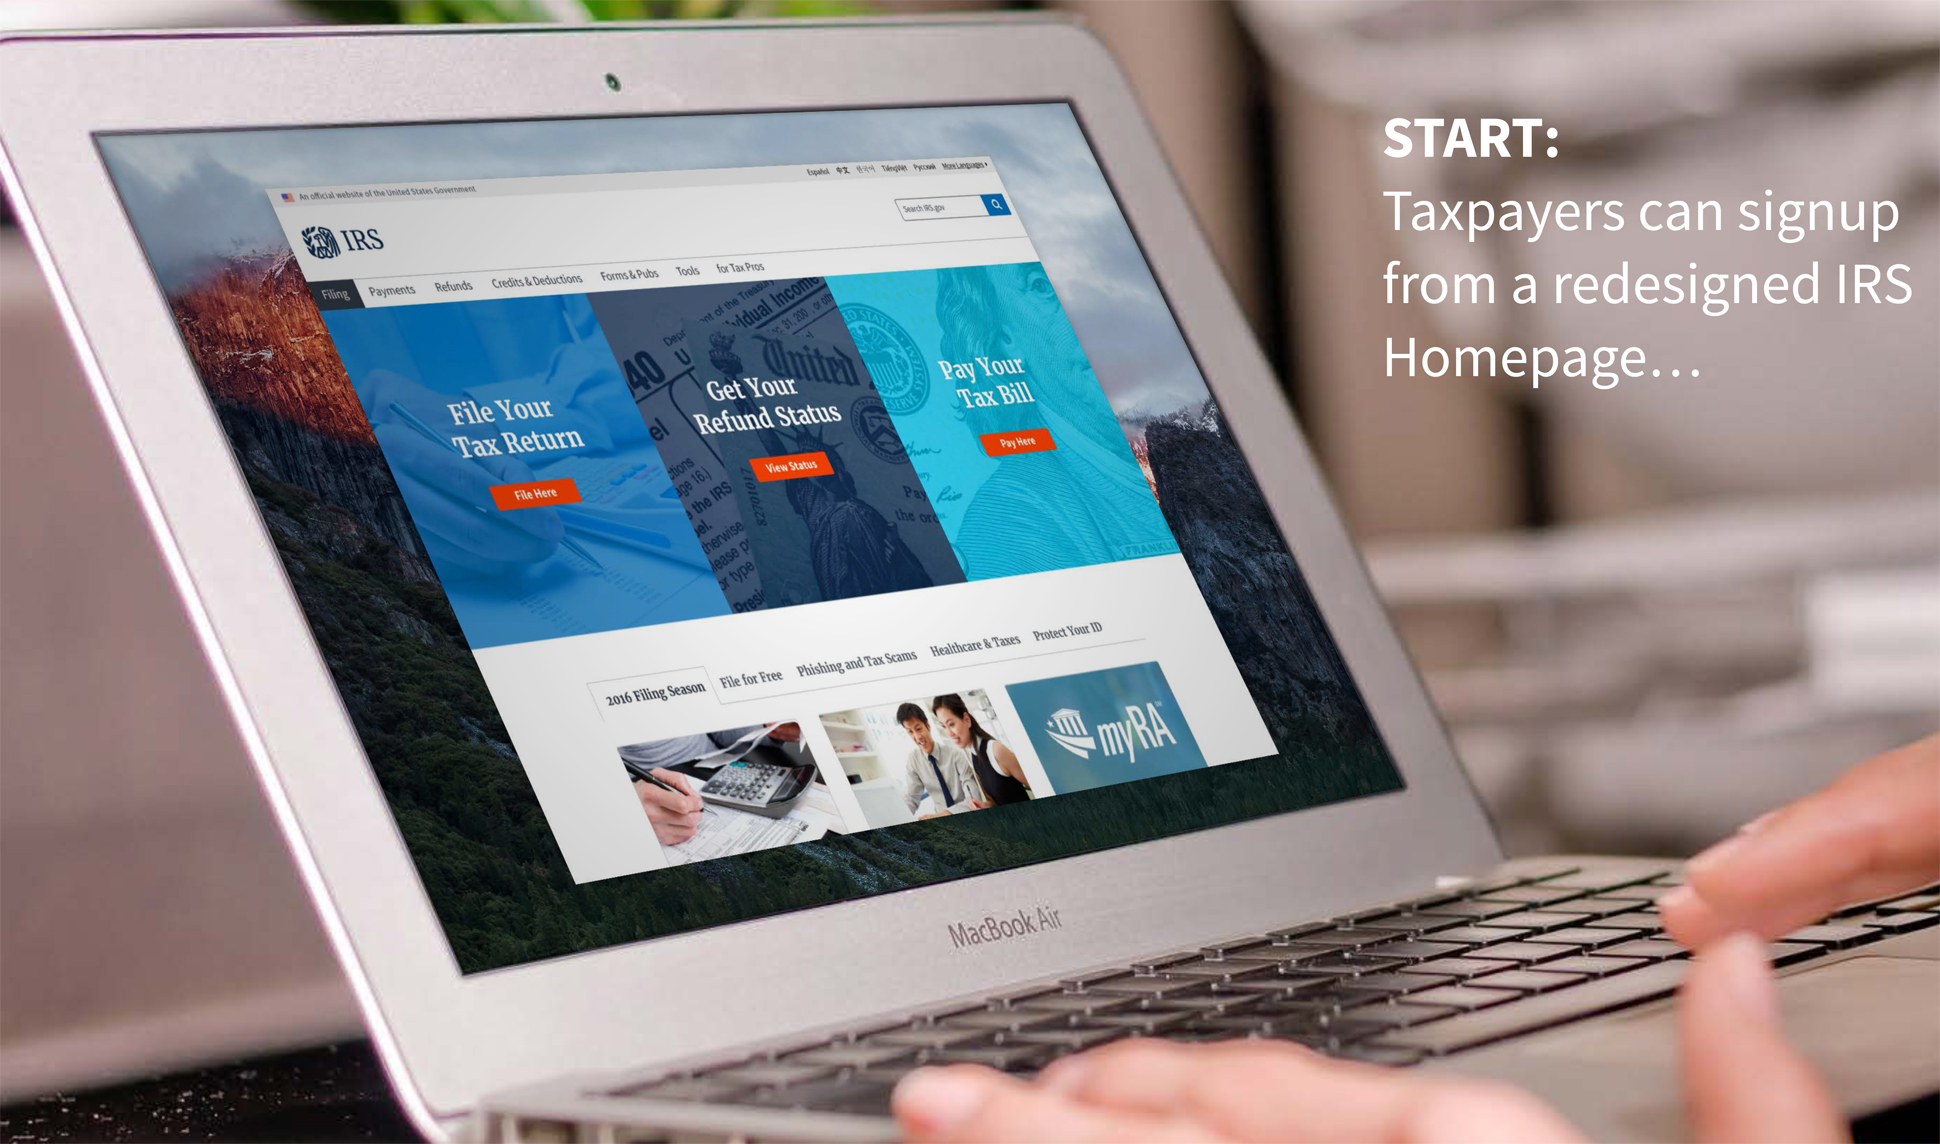 A page from a tax design challenge submission. Taxpayers can signup from a redesigned IRS homepage. A computer displays a homepage screen.